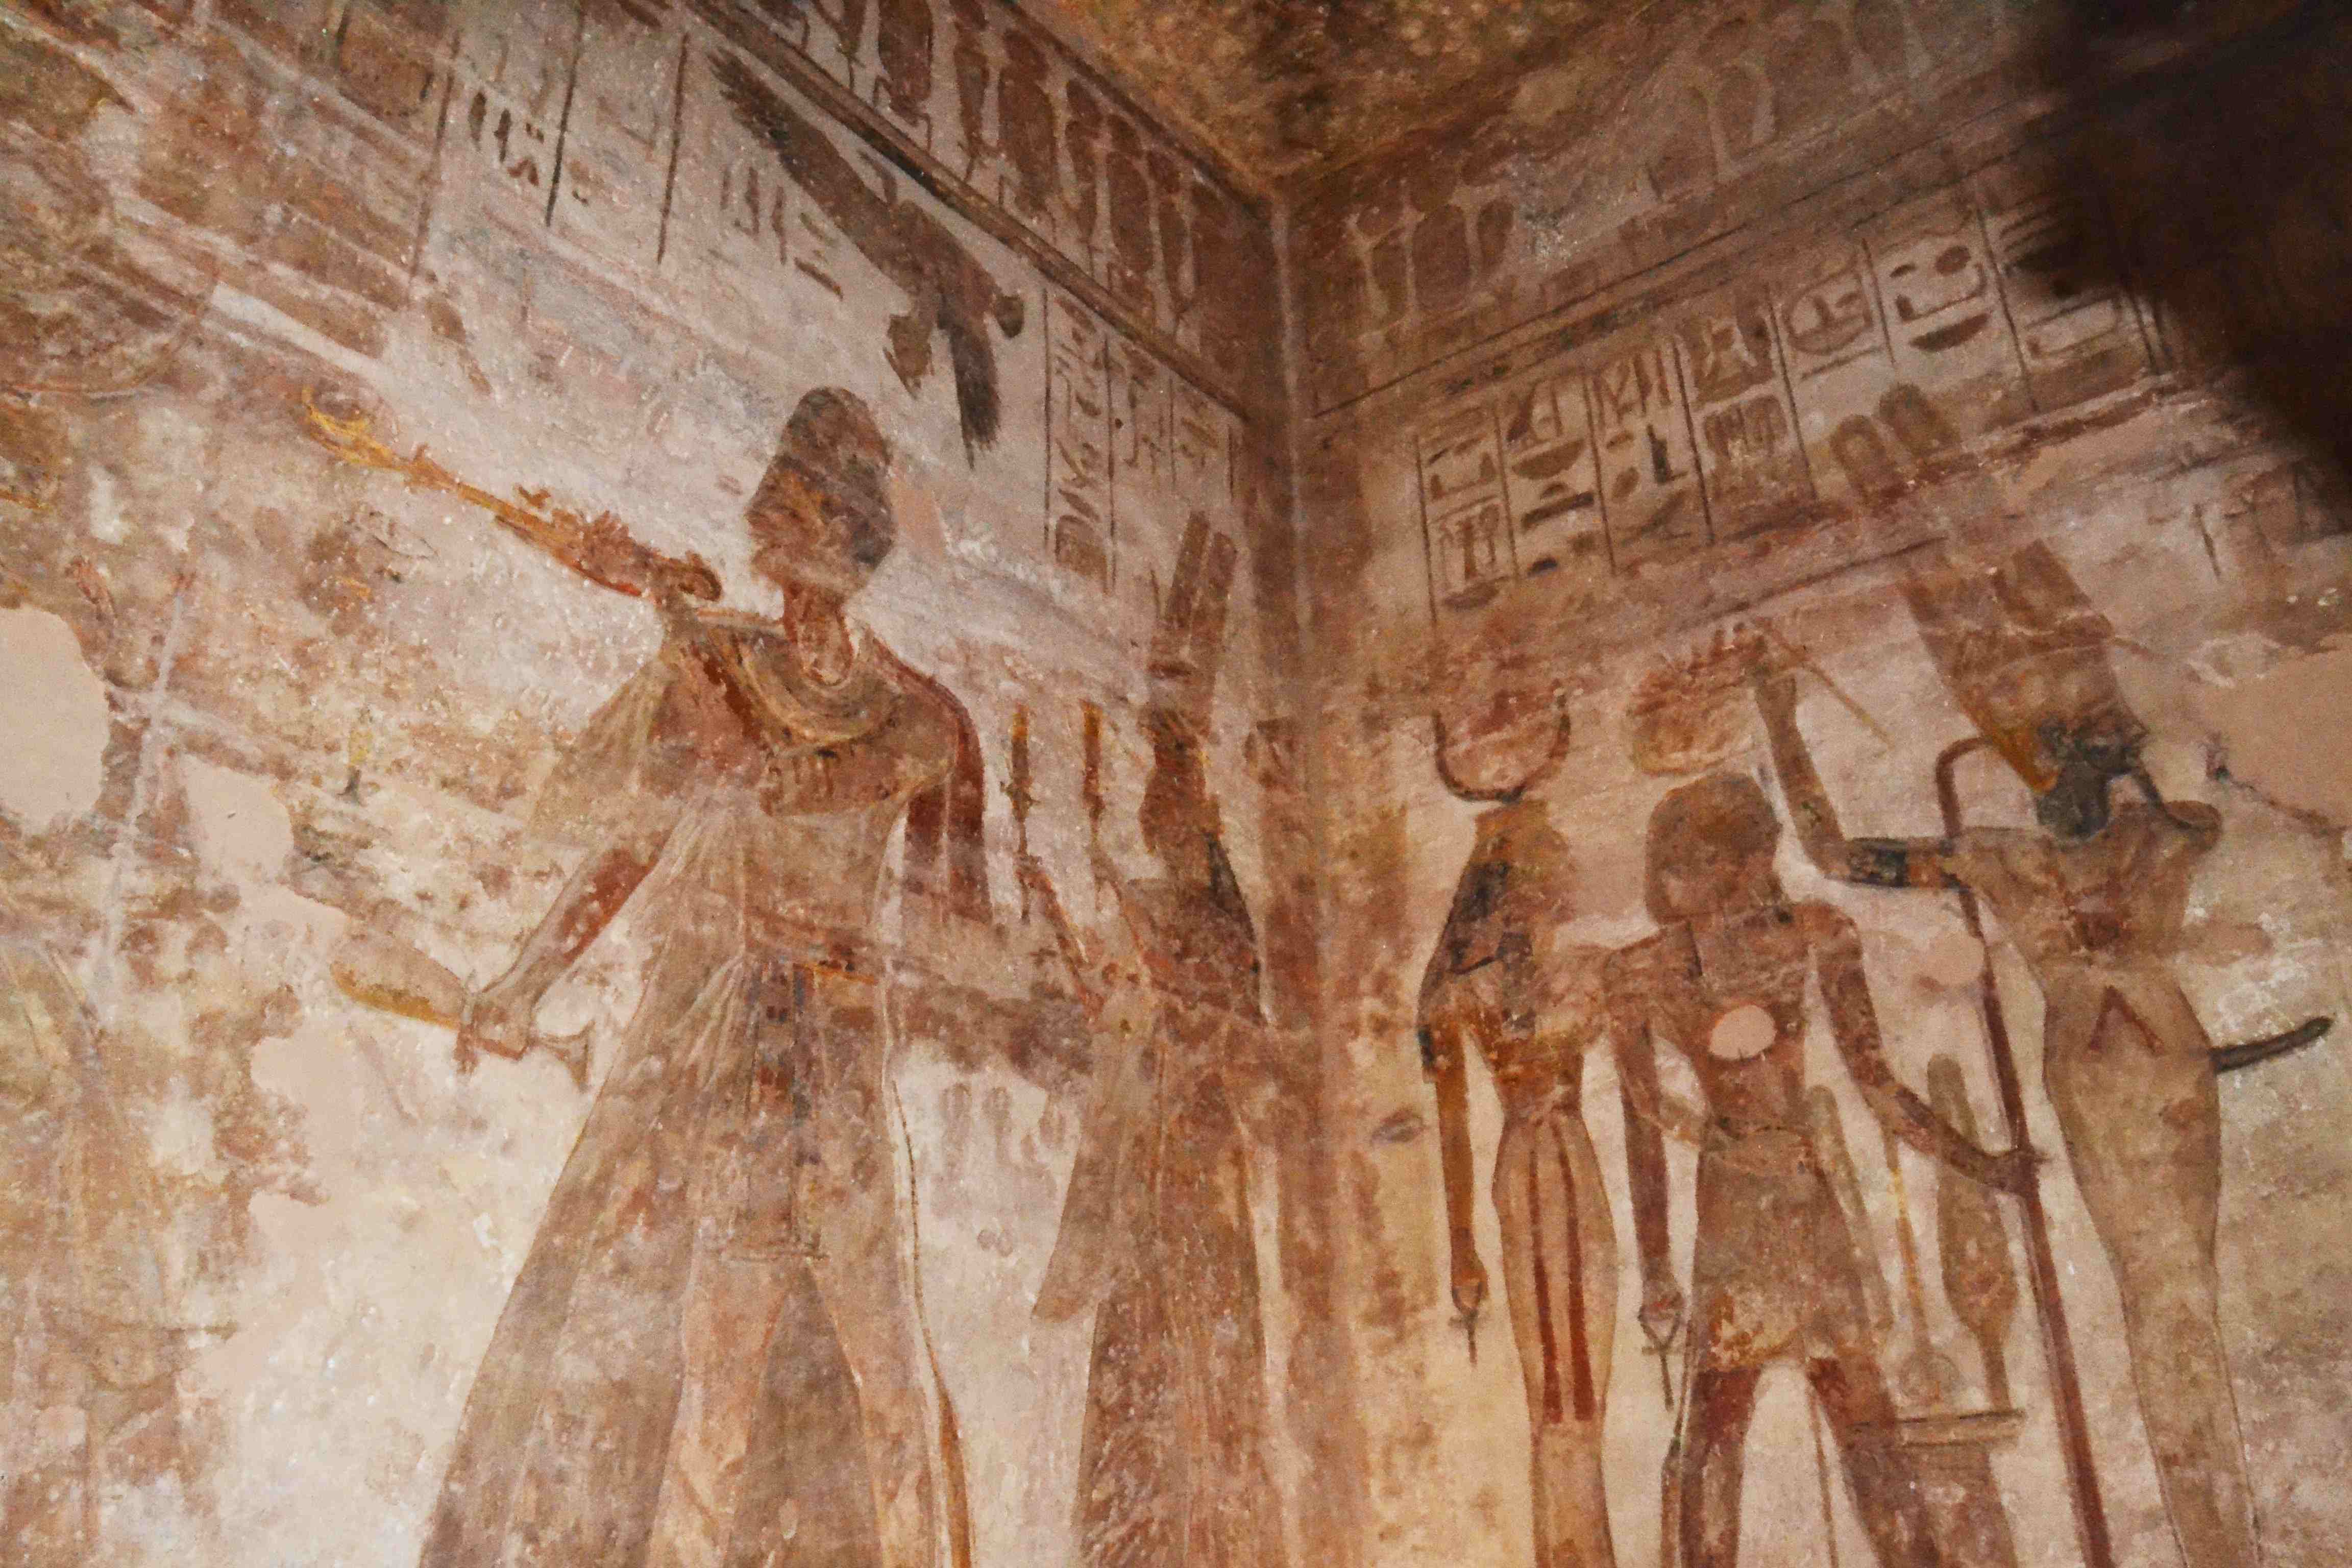 The Abu Simbel interior full of hieroglyphics that depicts the life and achievements of Ramses II